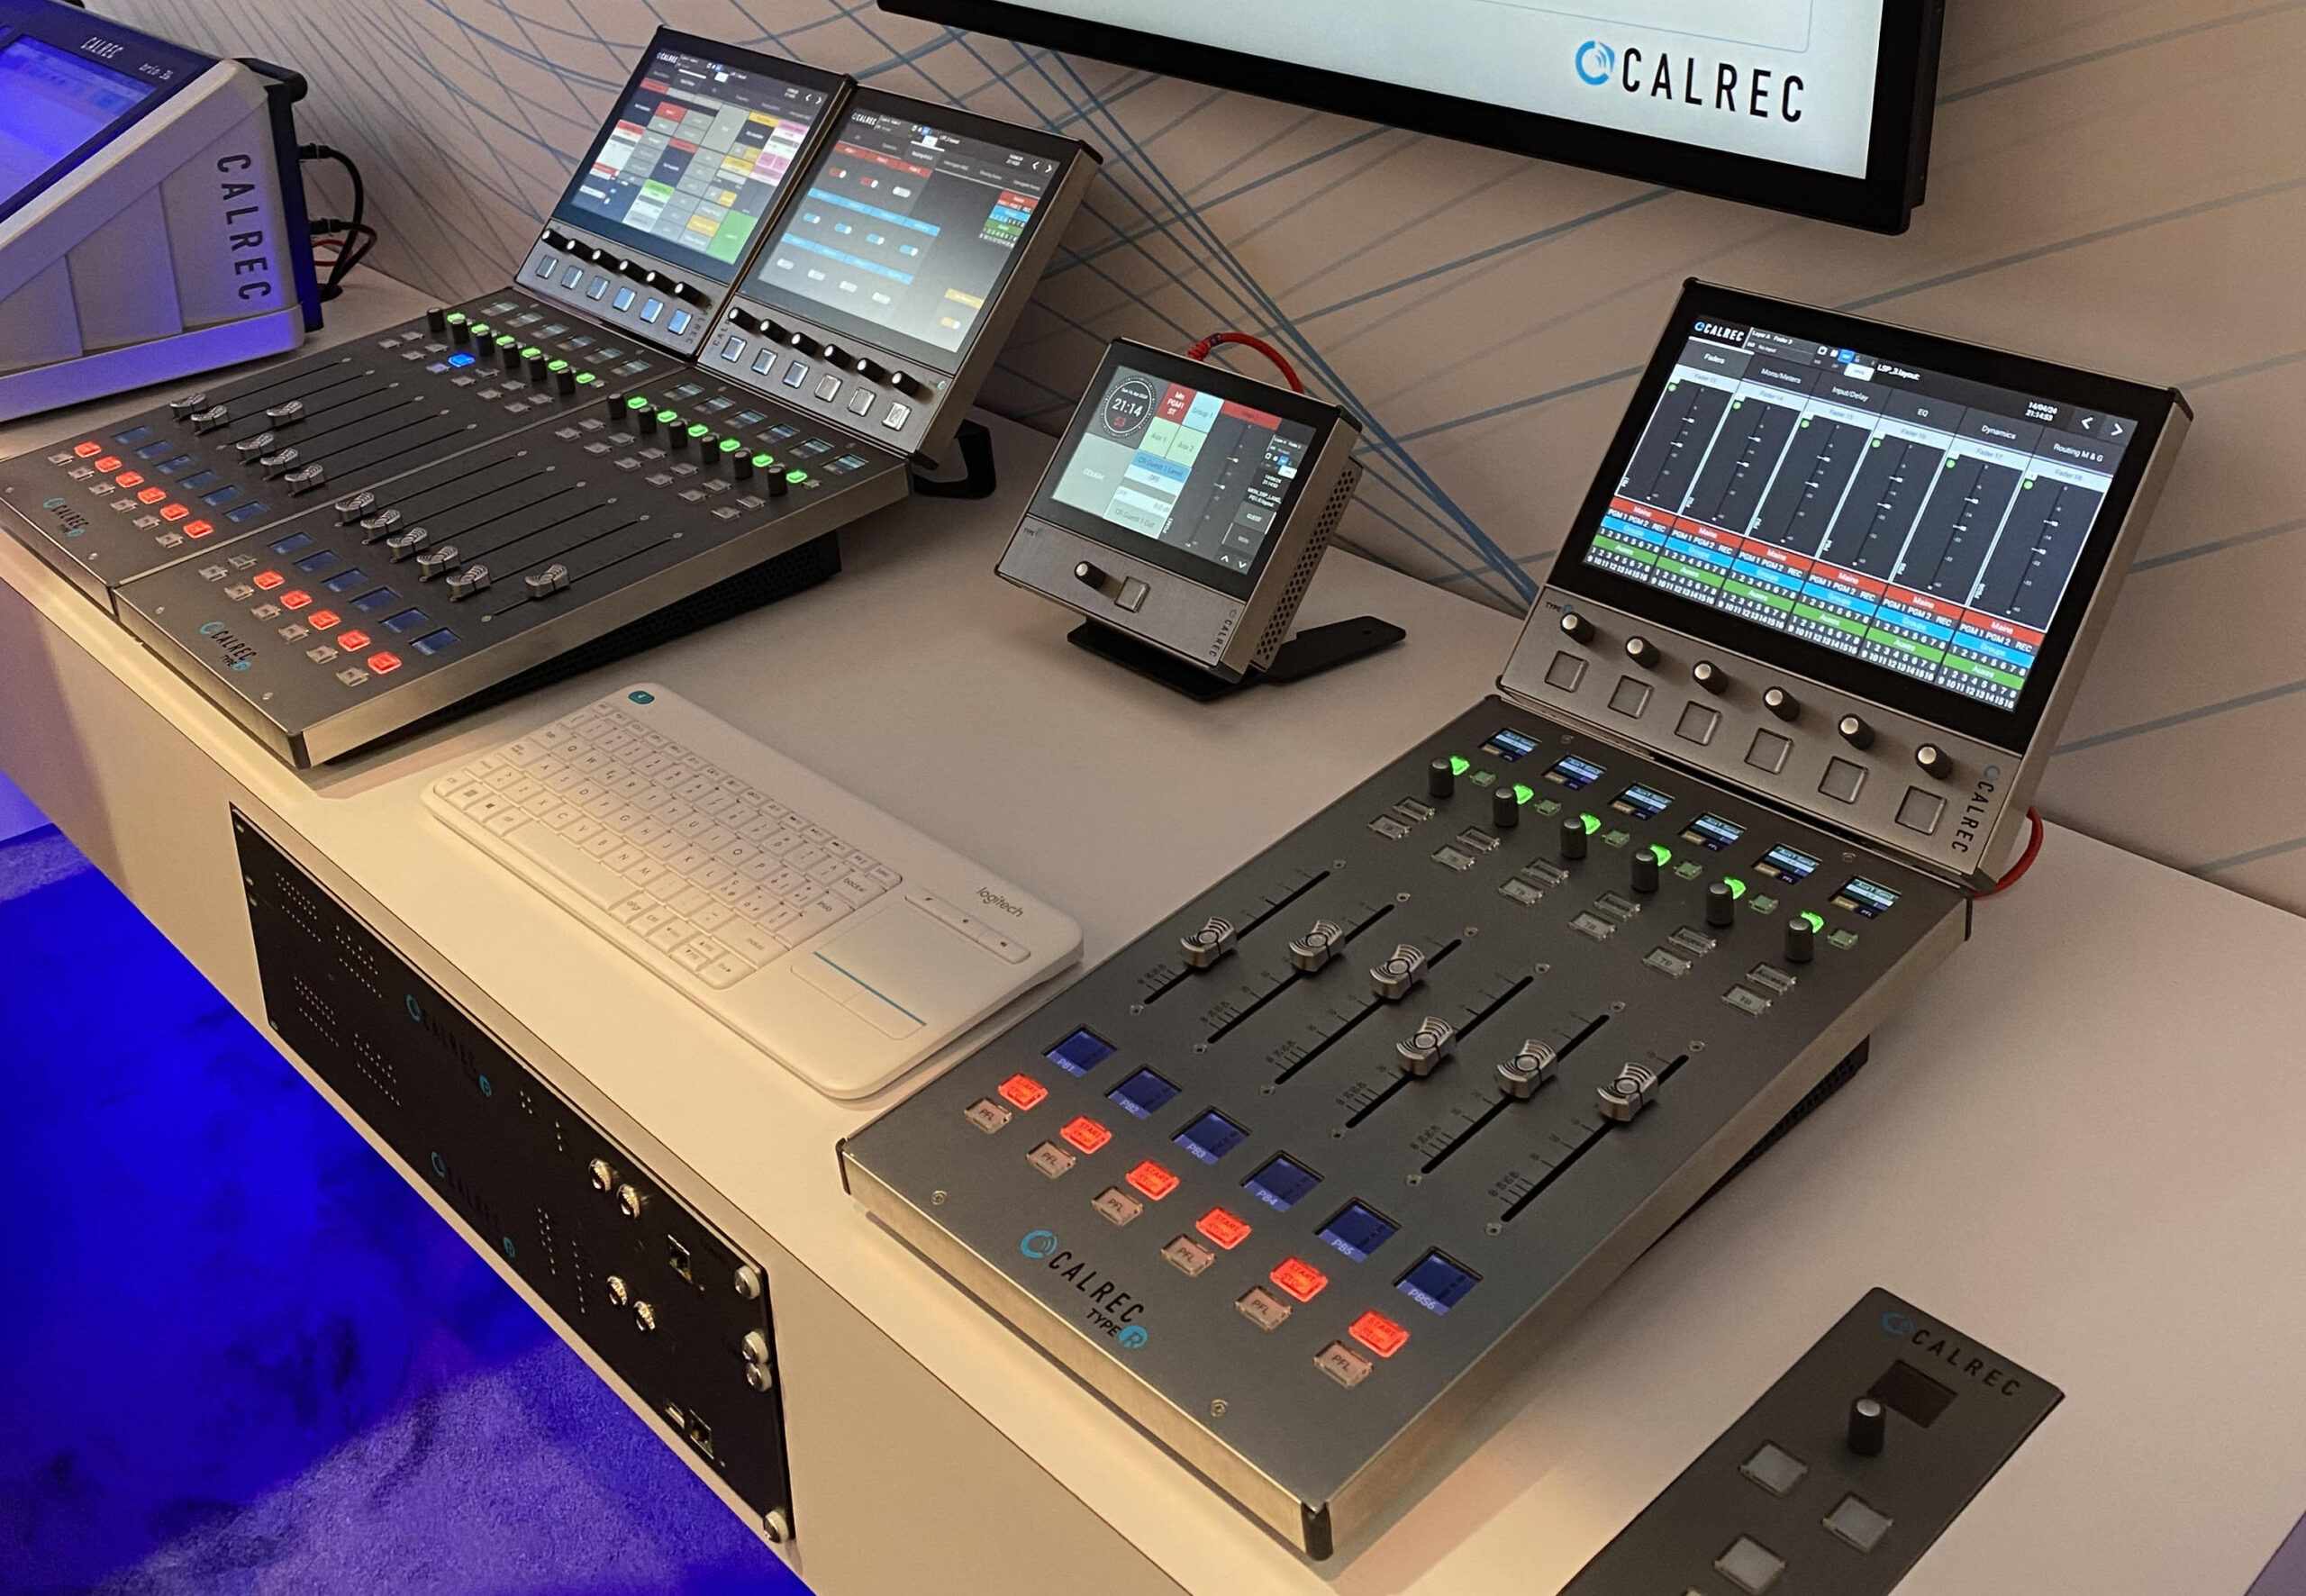 Calrec has its consoles on display for all to discover more about…